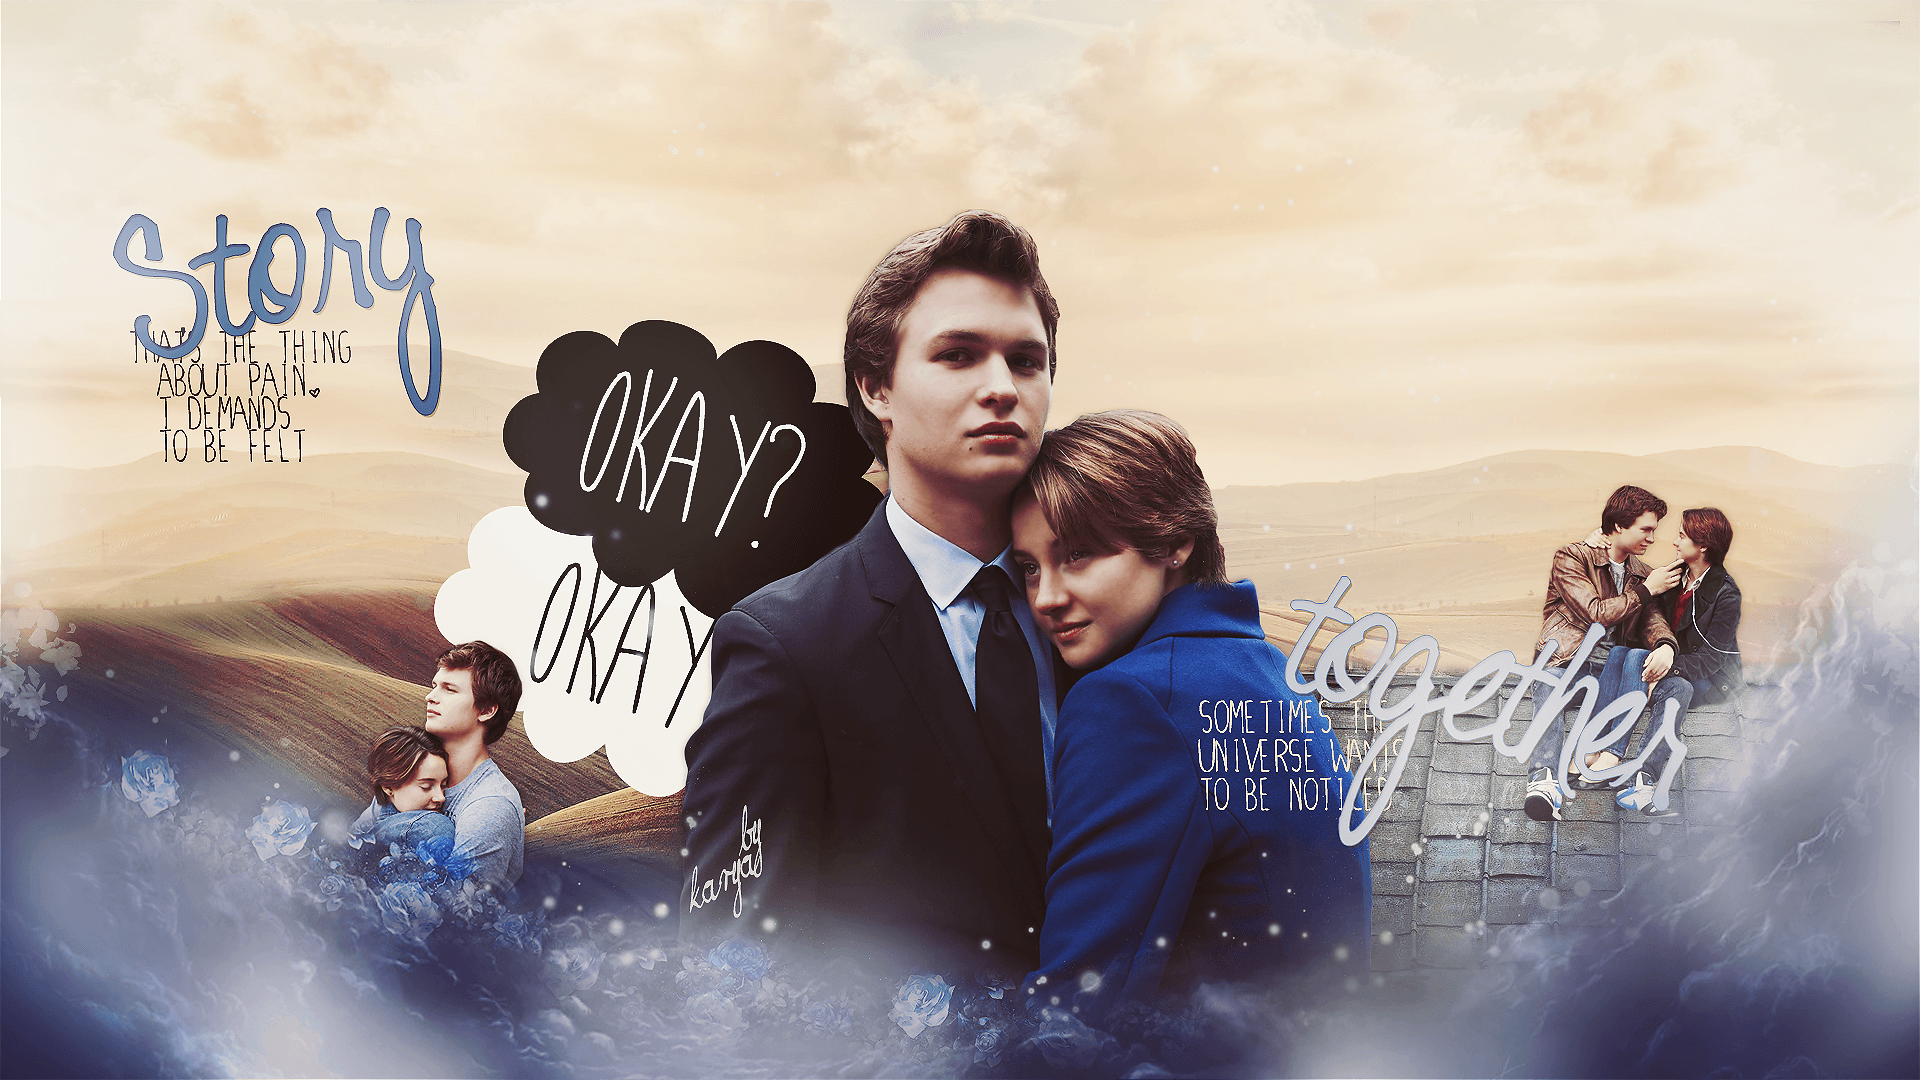 The Fault In Our Stars Wallpaper, The Fault In Our Stars